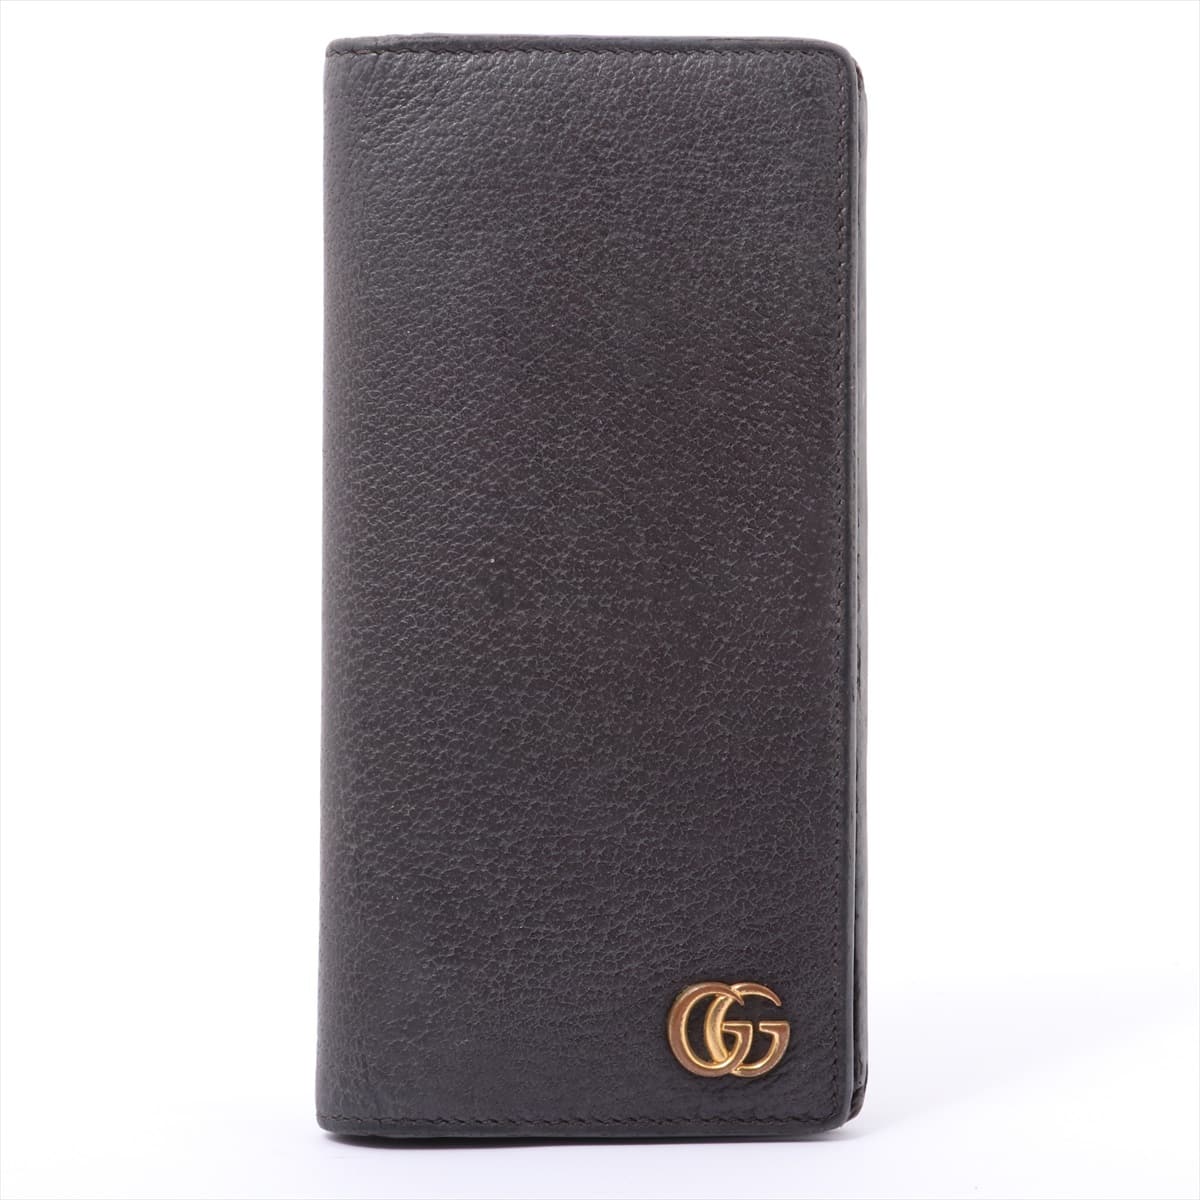 Gucci GG Marmont 428740 Leather Wallet Black